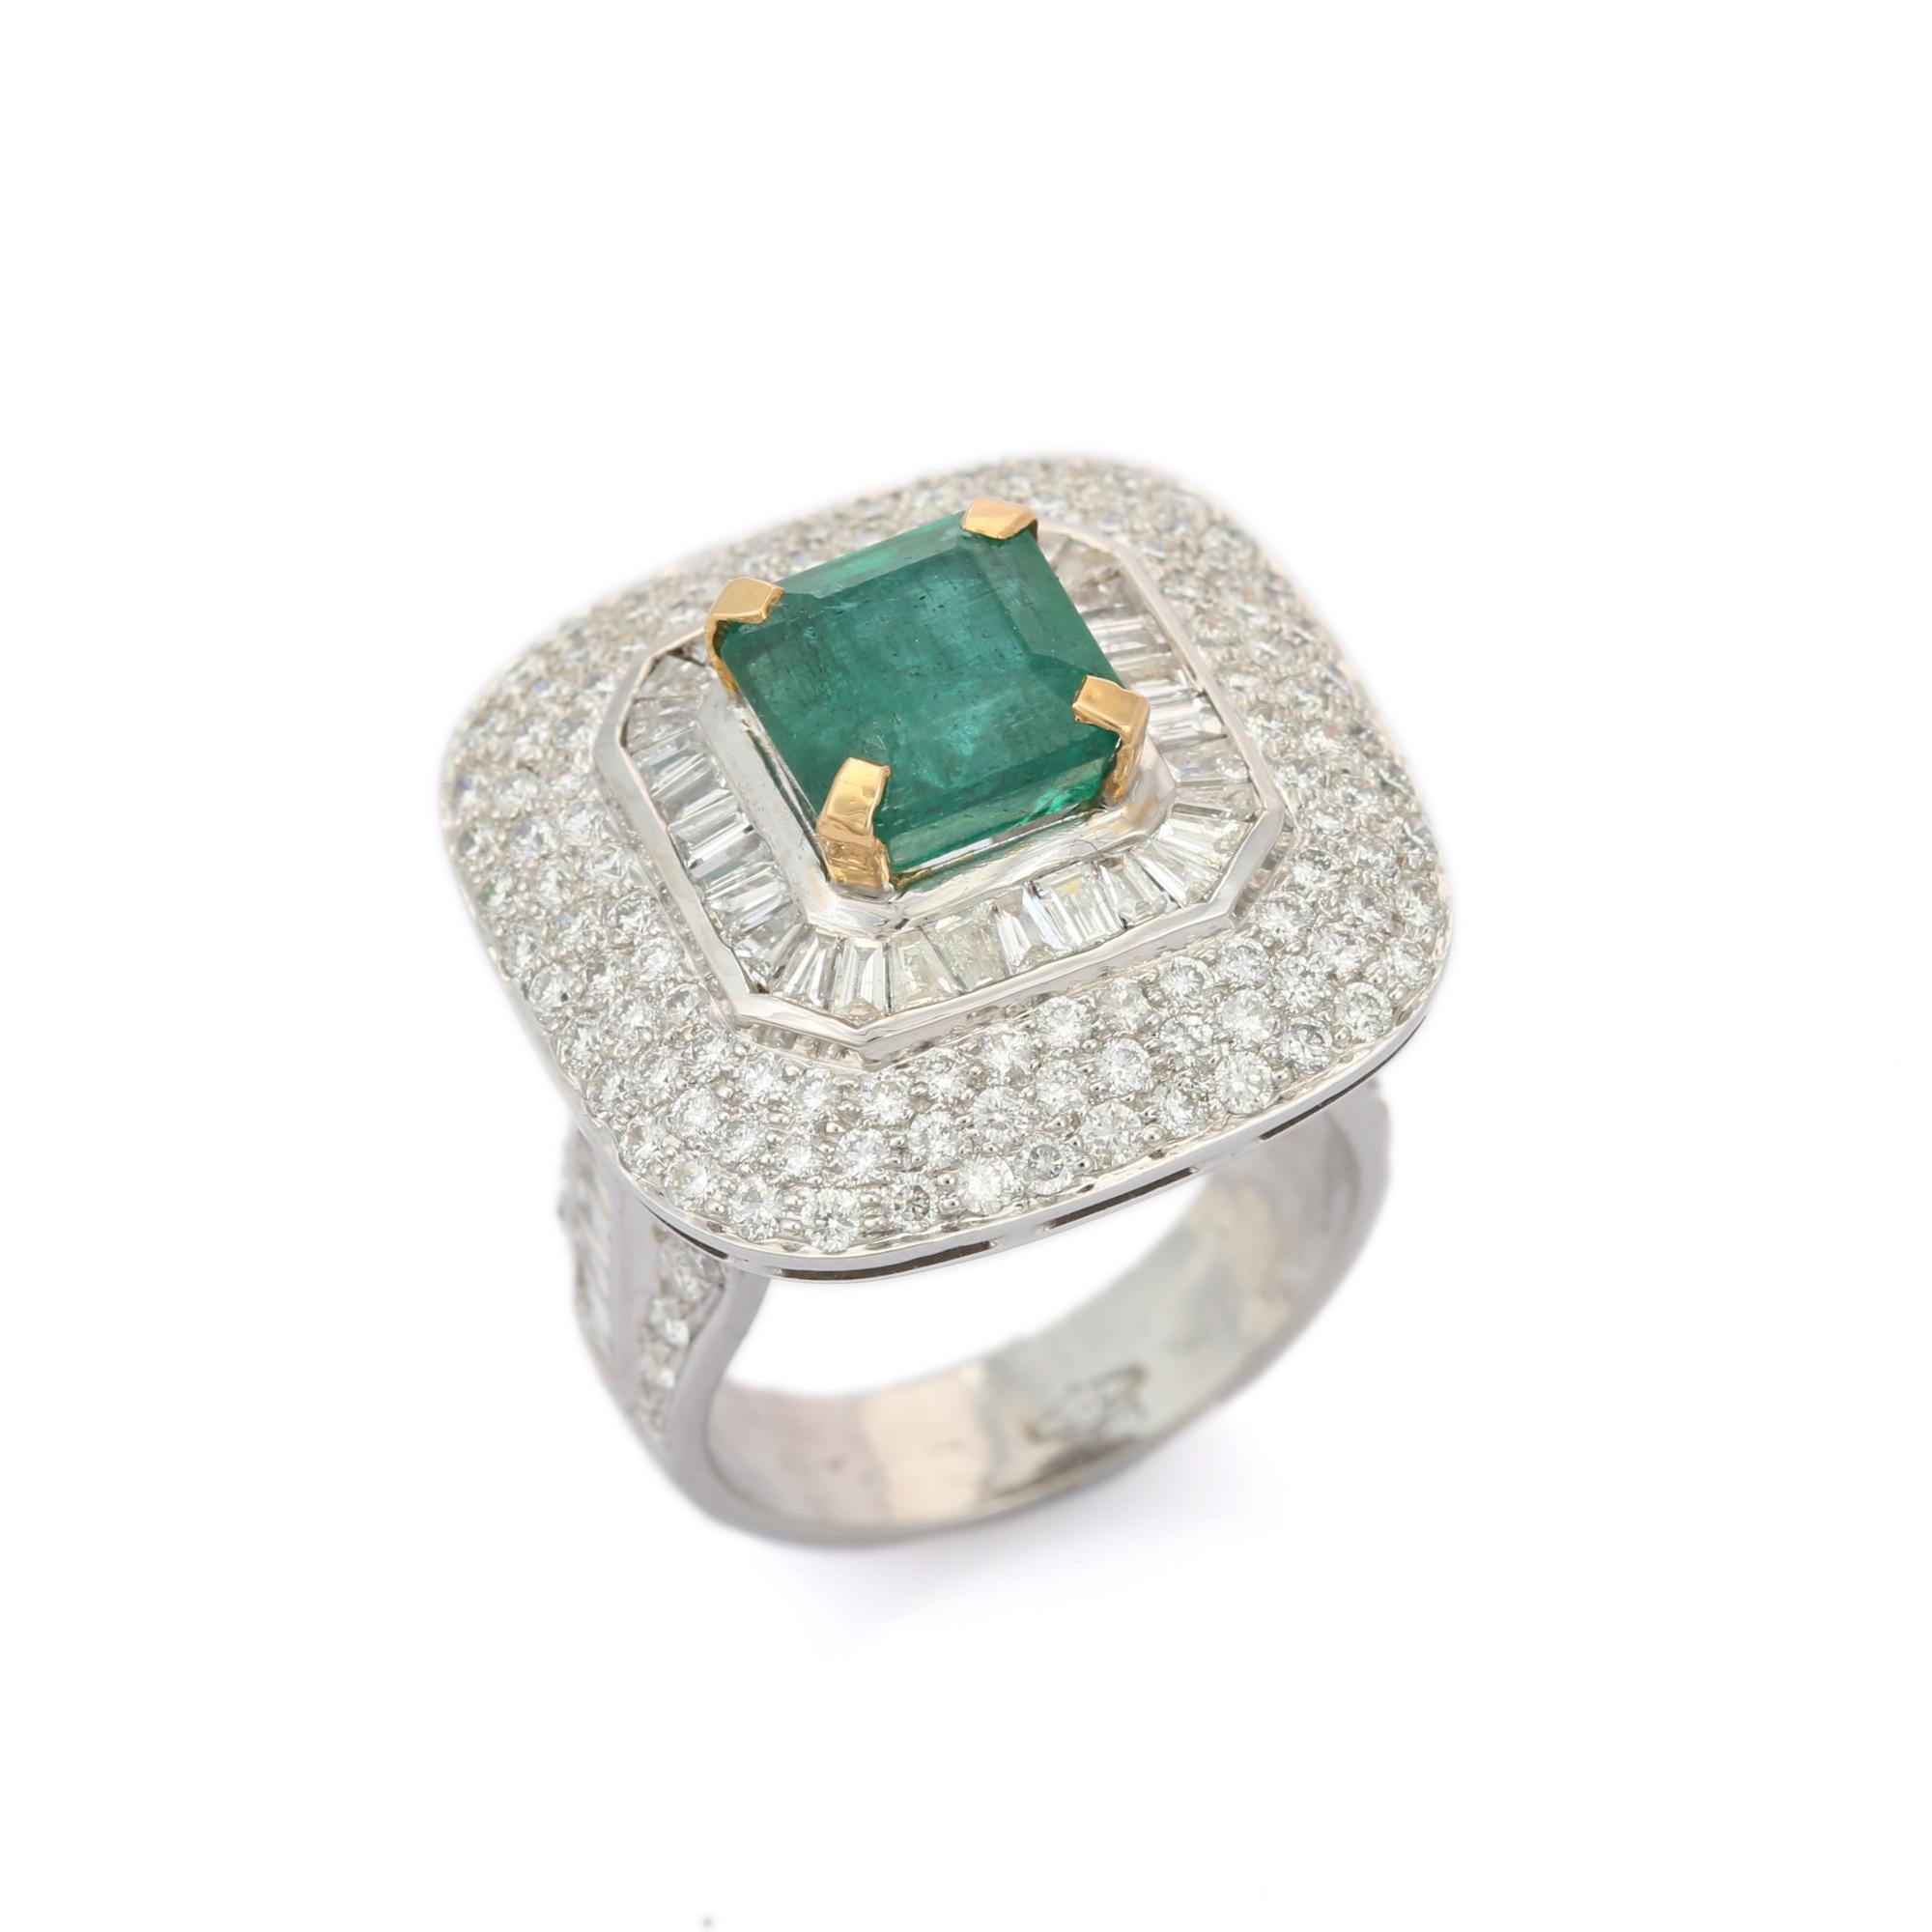 For Sale:  18kt Solid White Gold Diamond Studded Big Emerald Ring For Women 7